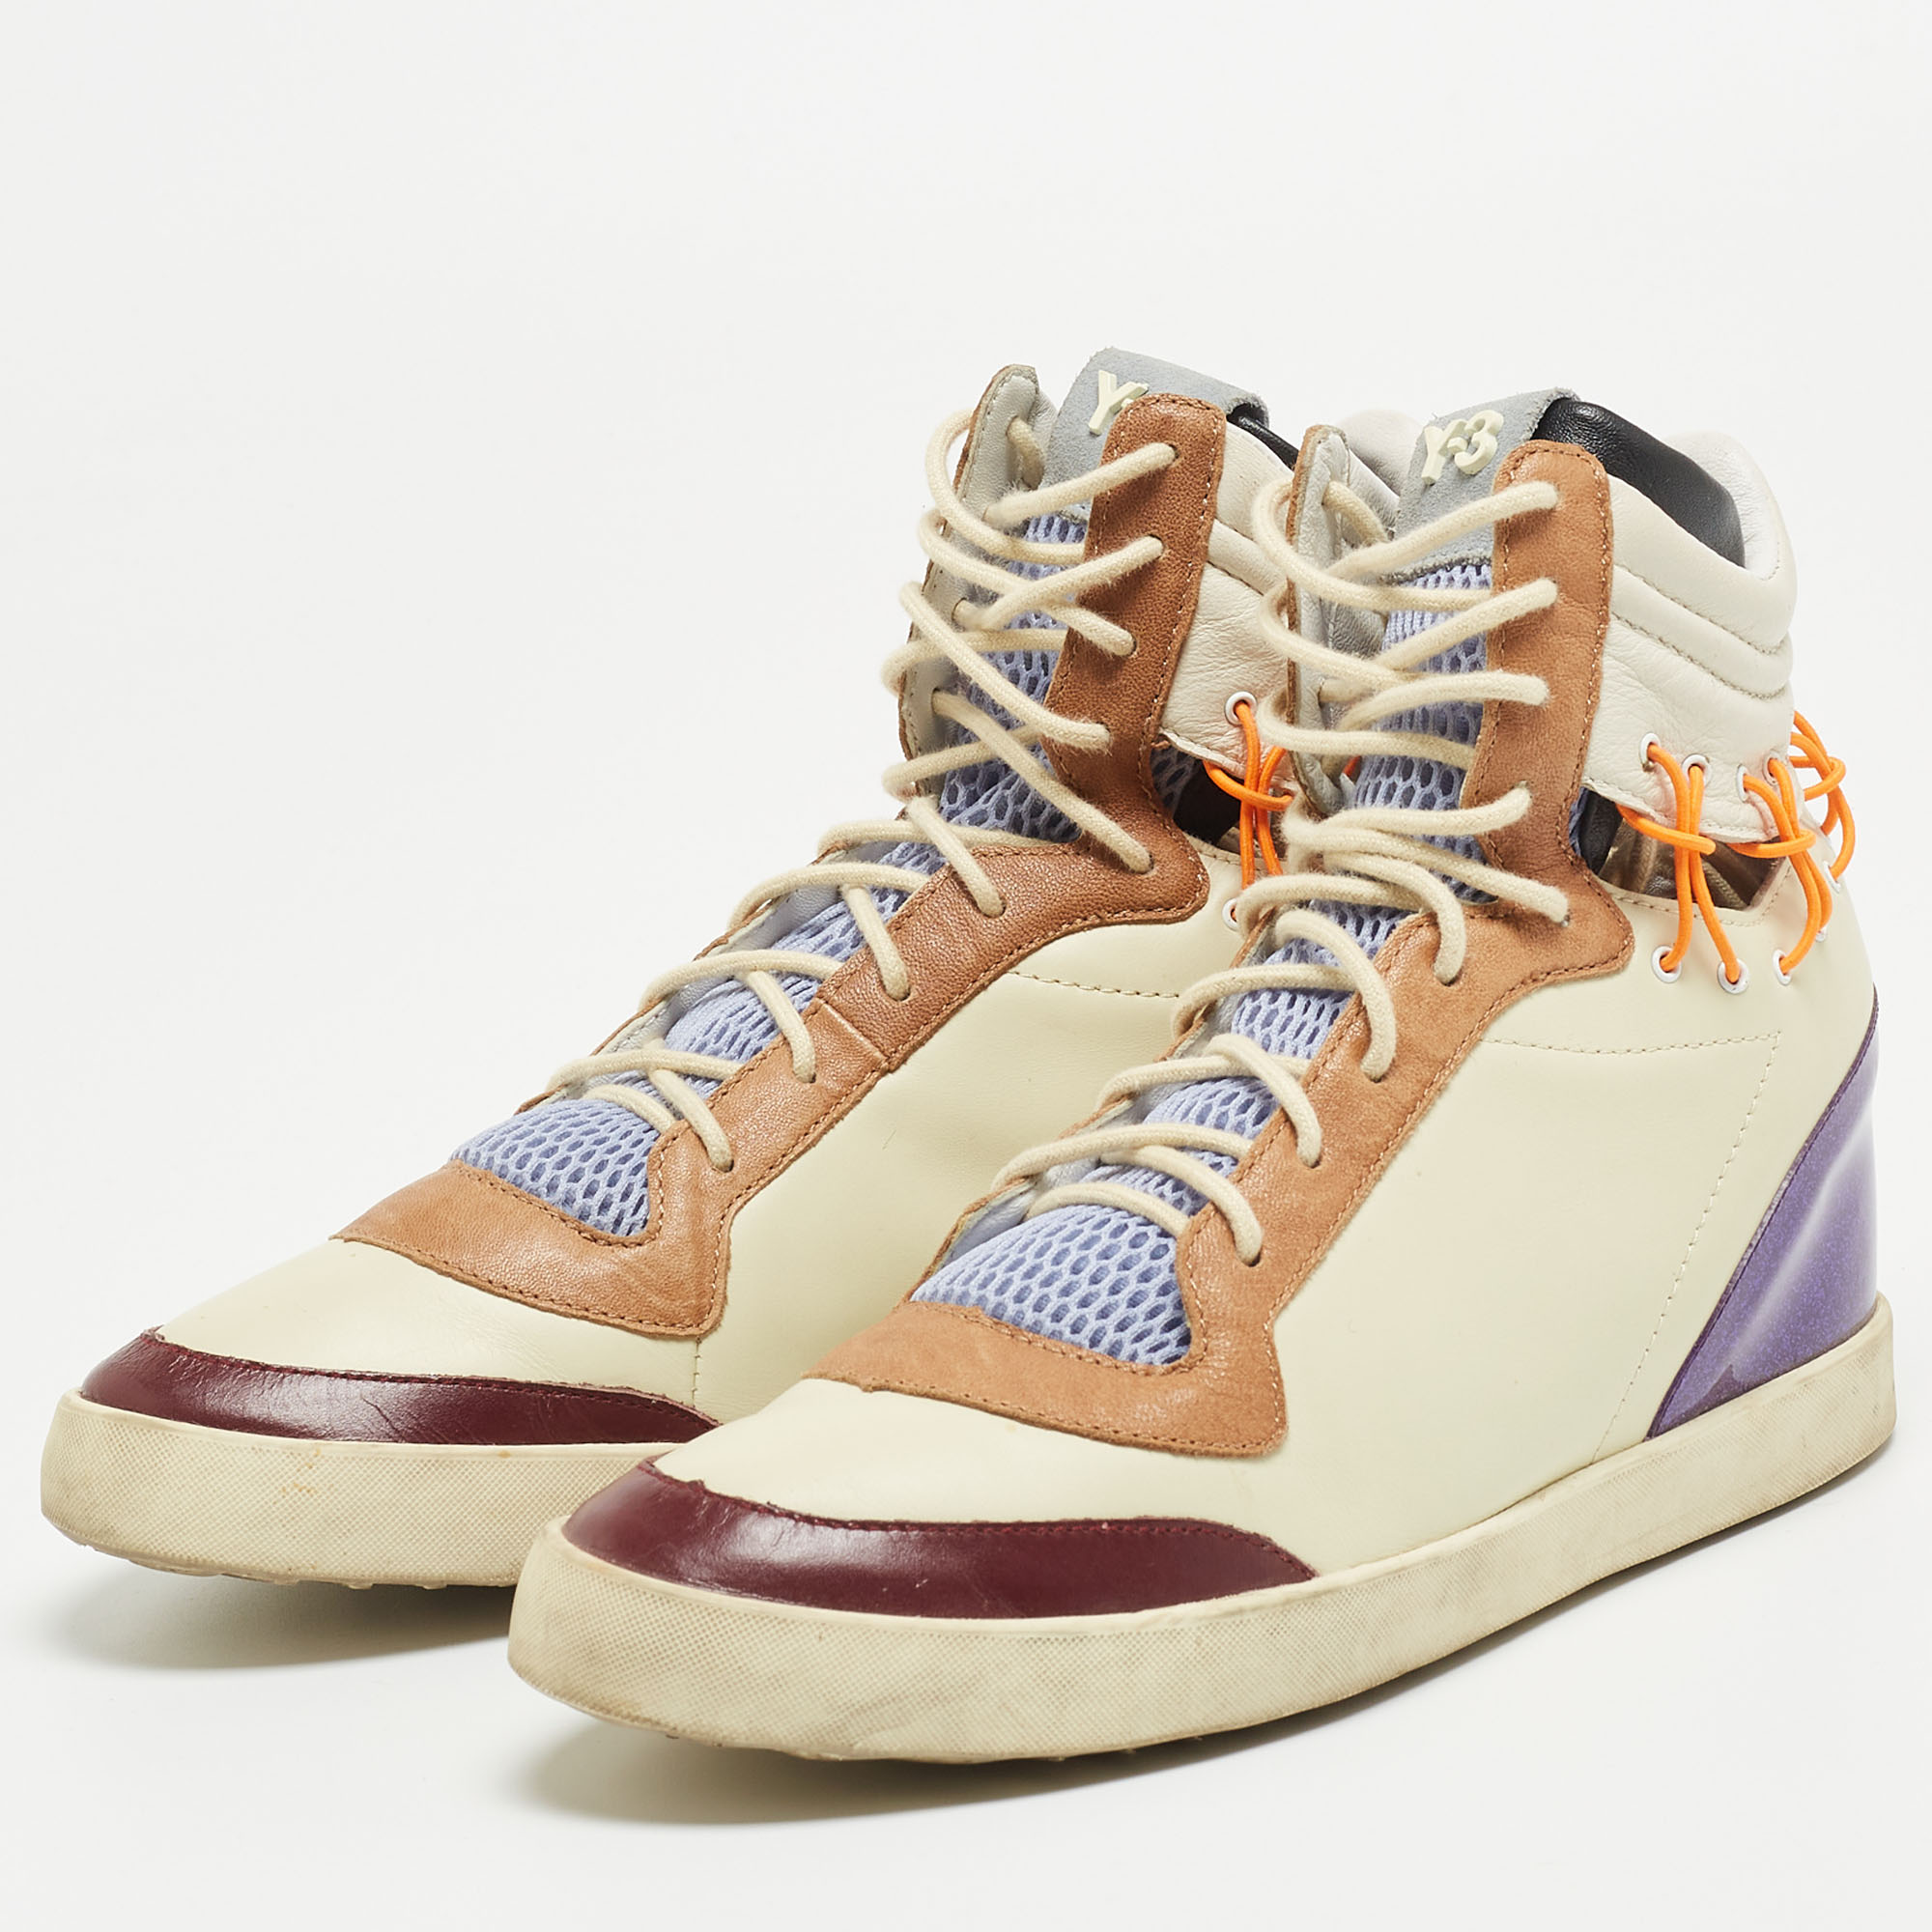 

Y3 x Adidas By Raf Simons Multicolor Leather High Top Sneakers Size